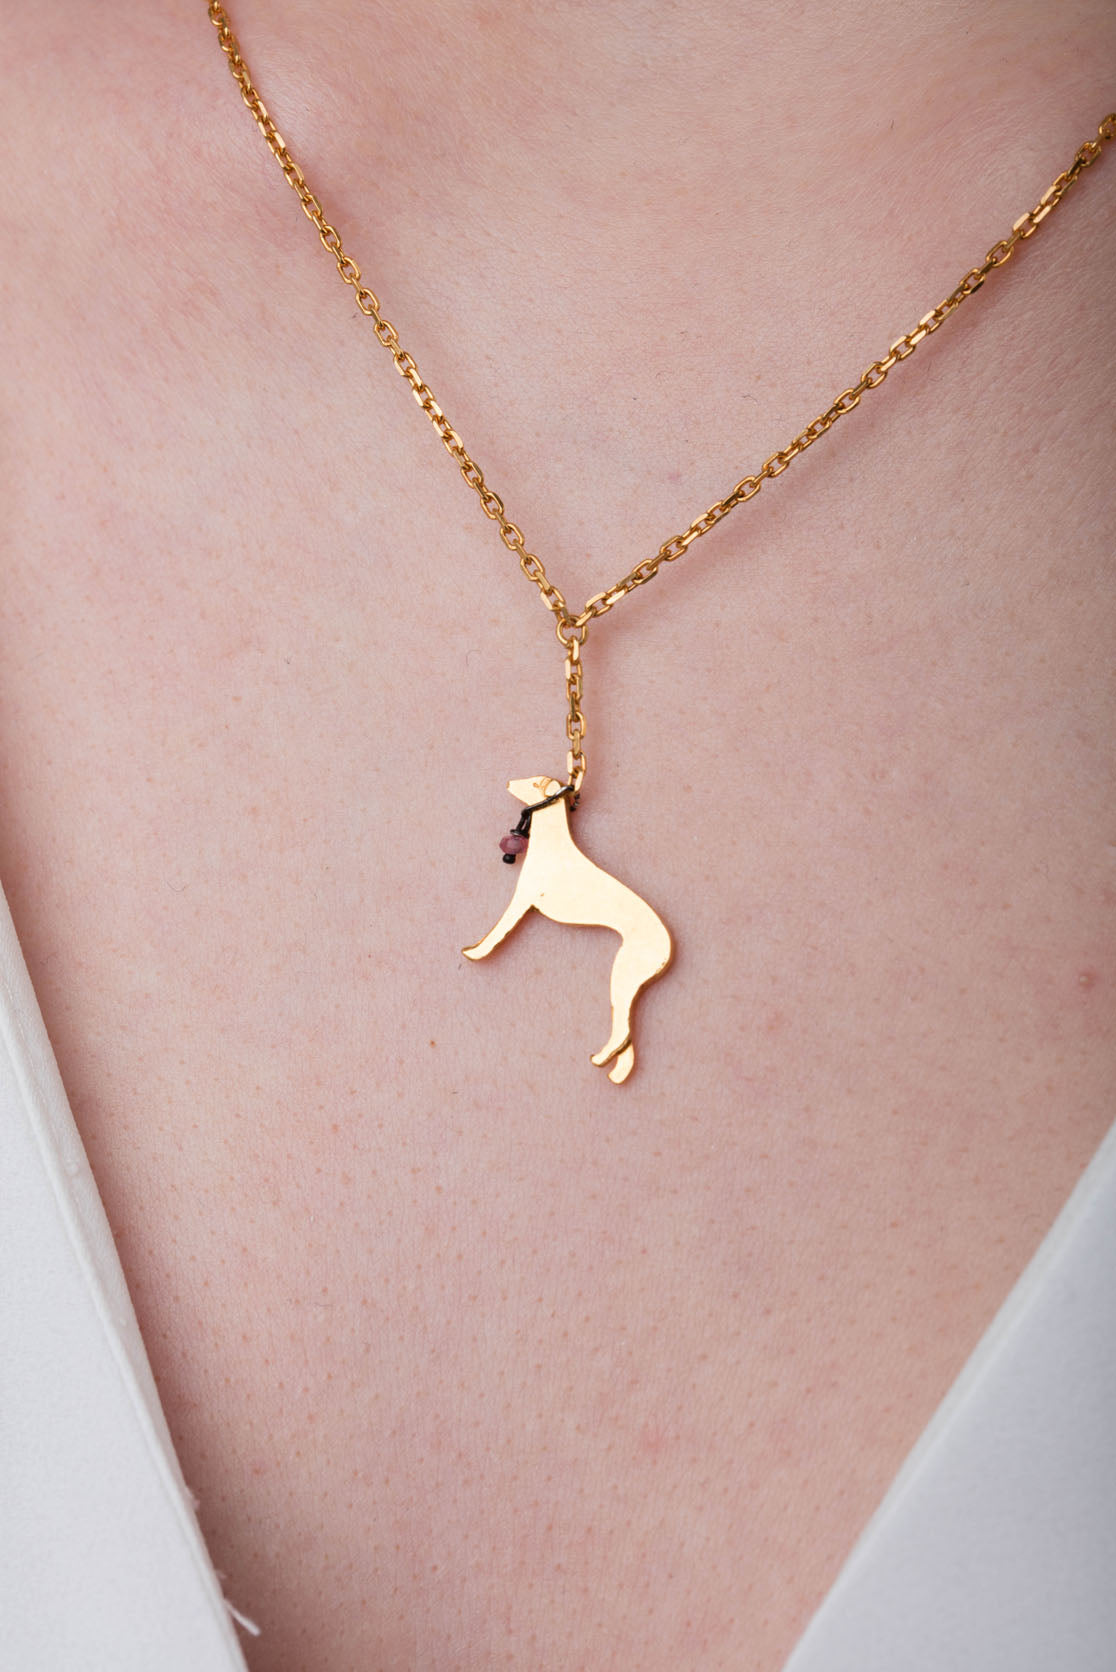 Greyhound Necklace in silver, gold plate or black